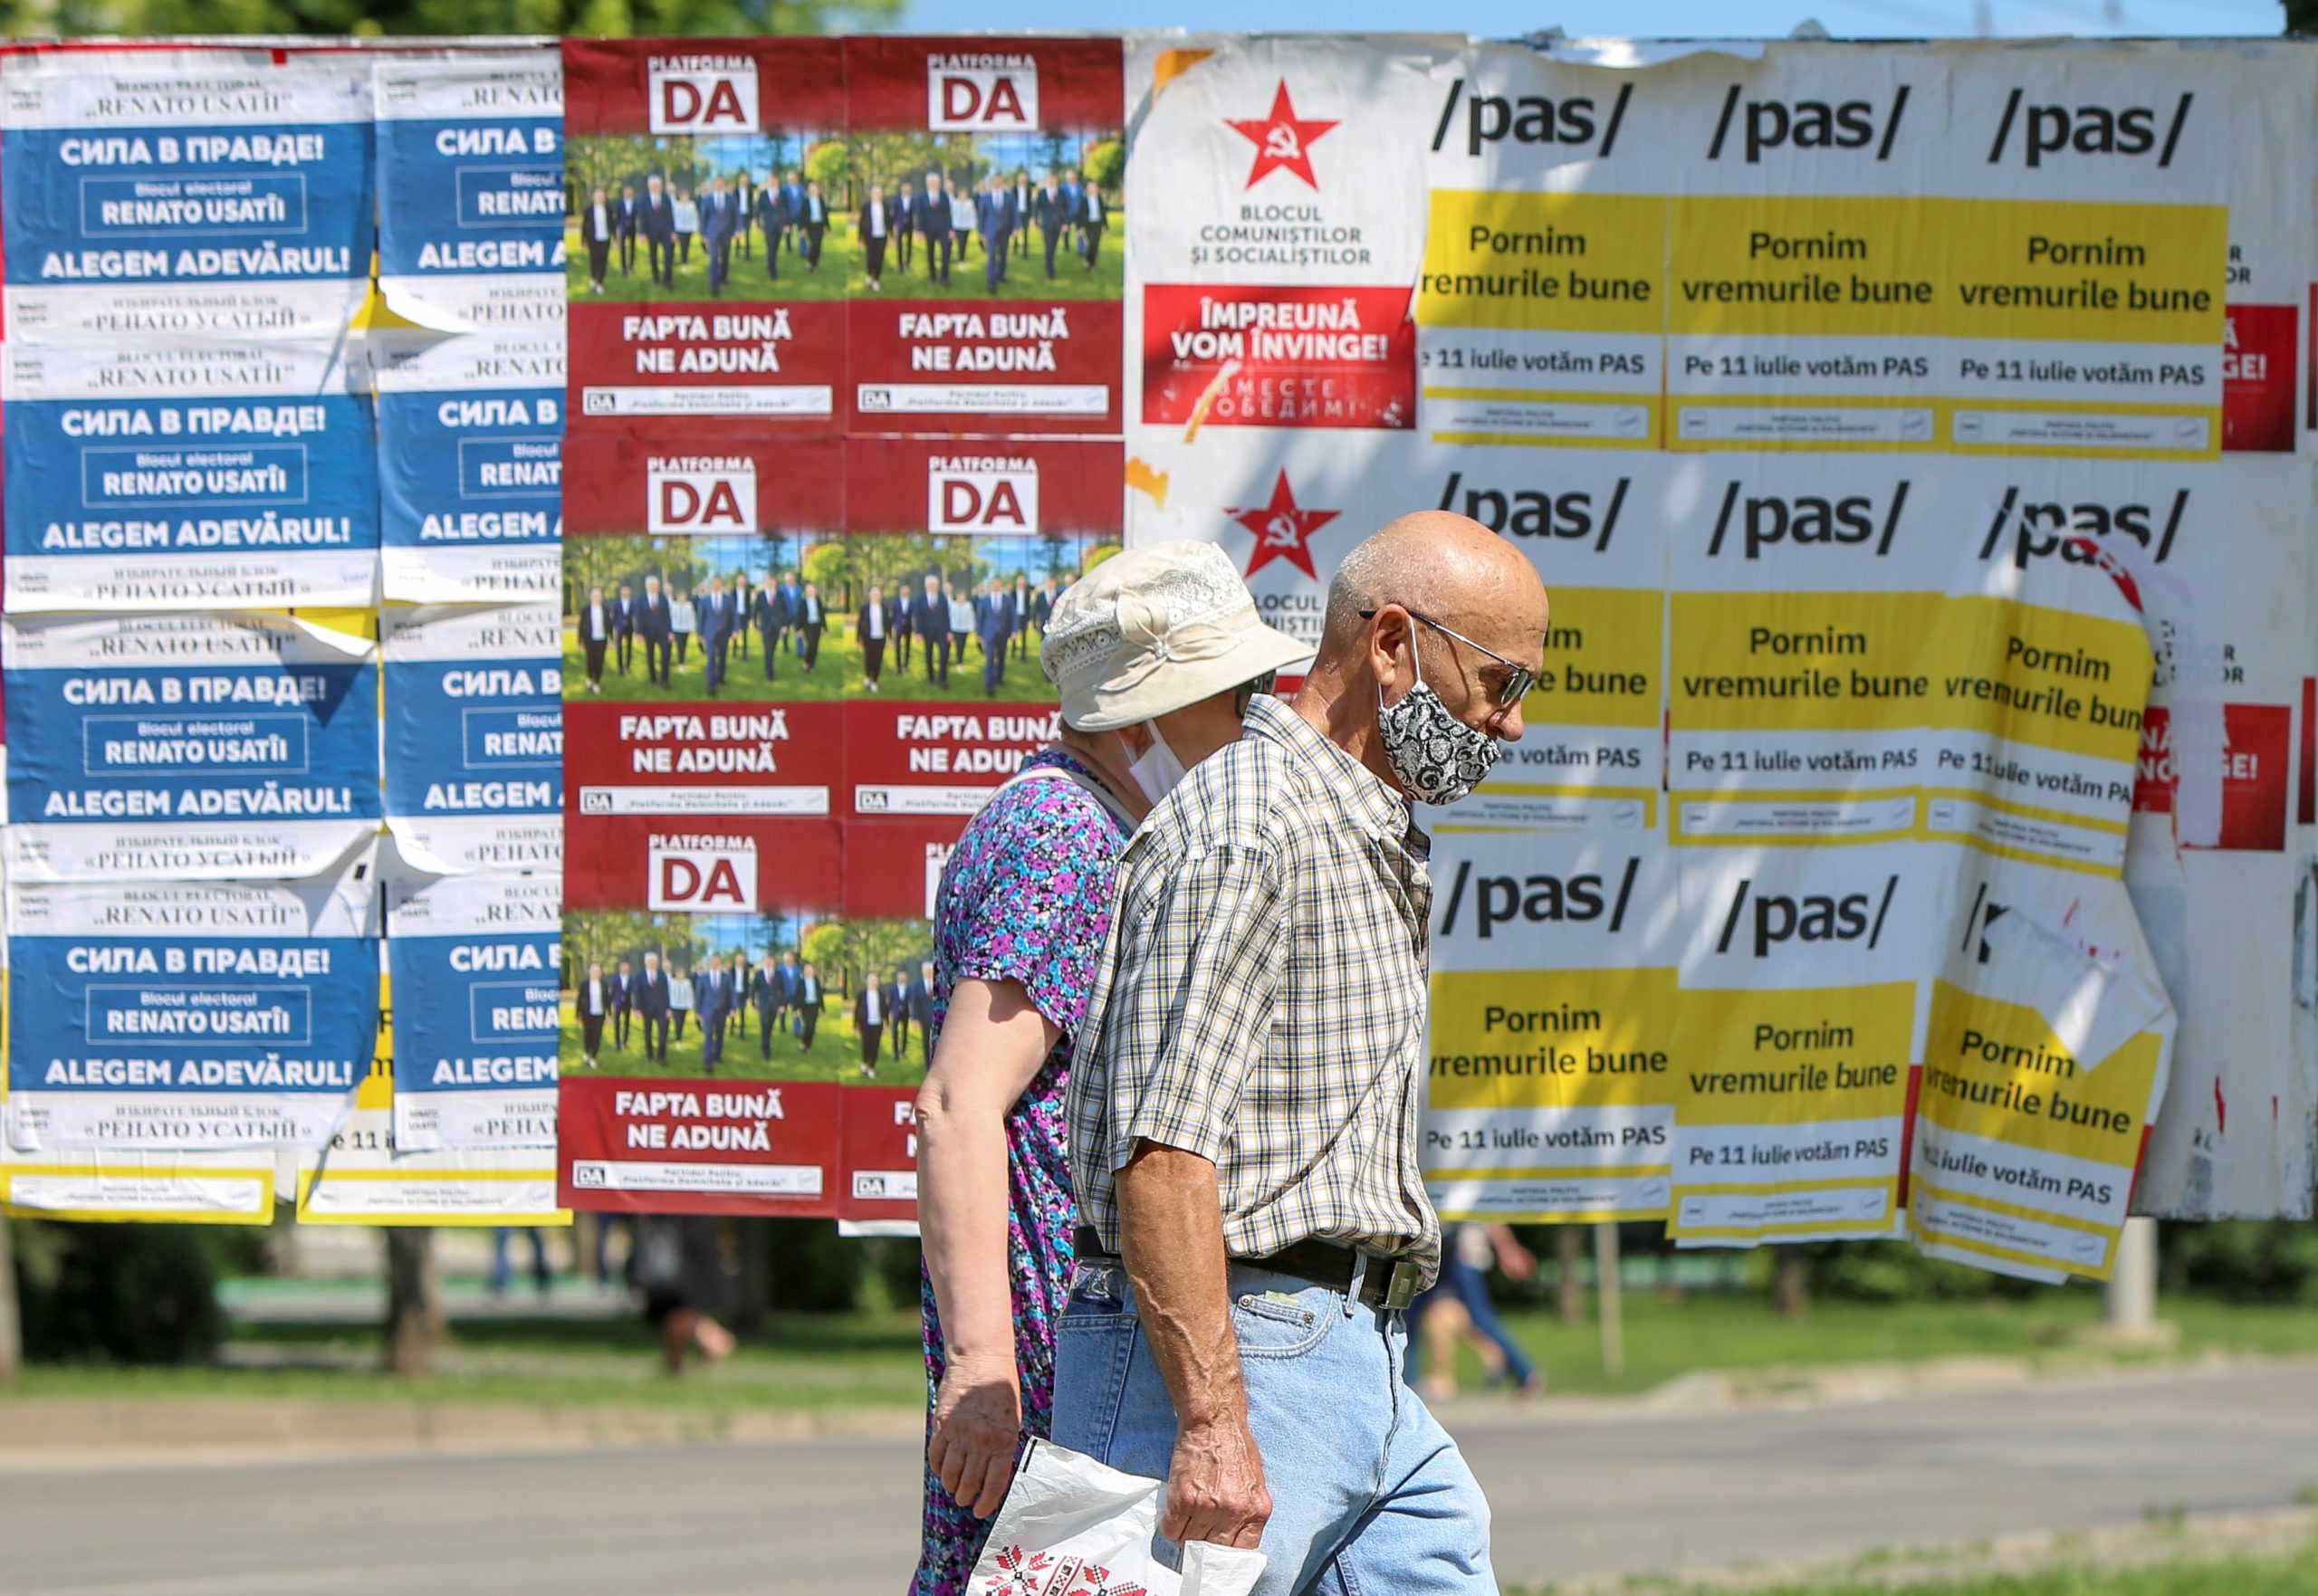 Photo: People walk past election campaign posters ahead of snap parliamentary election, scheduled on July 11, in Chisinau, Moldova July 7, 2021. Credit: REUTERS/Vladislav Culiomza